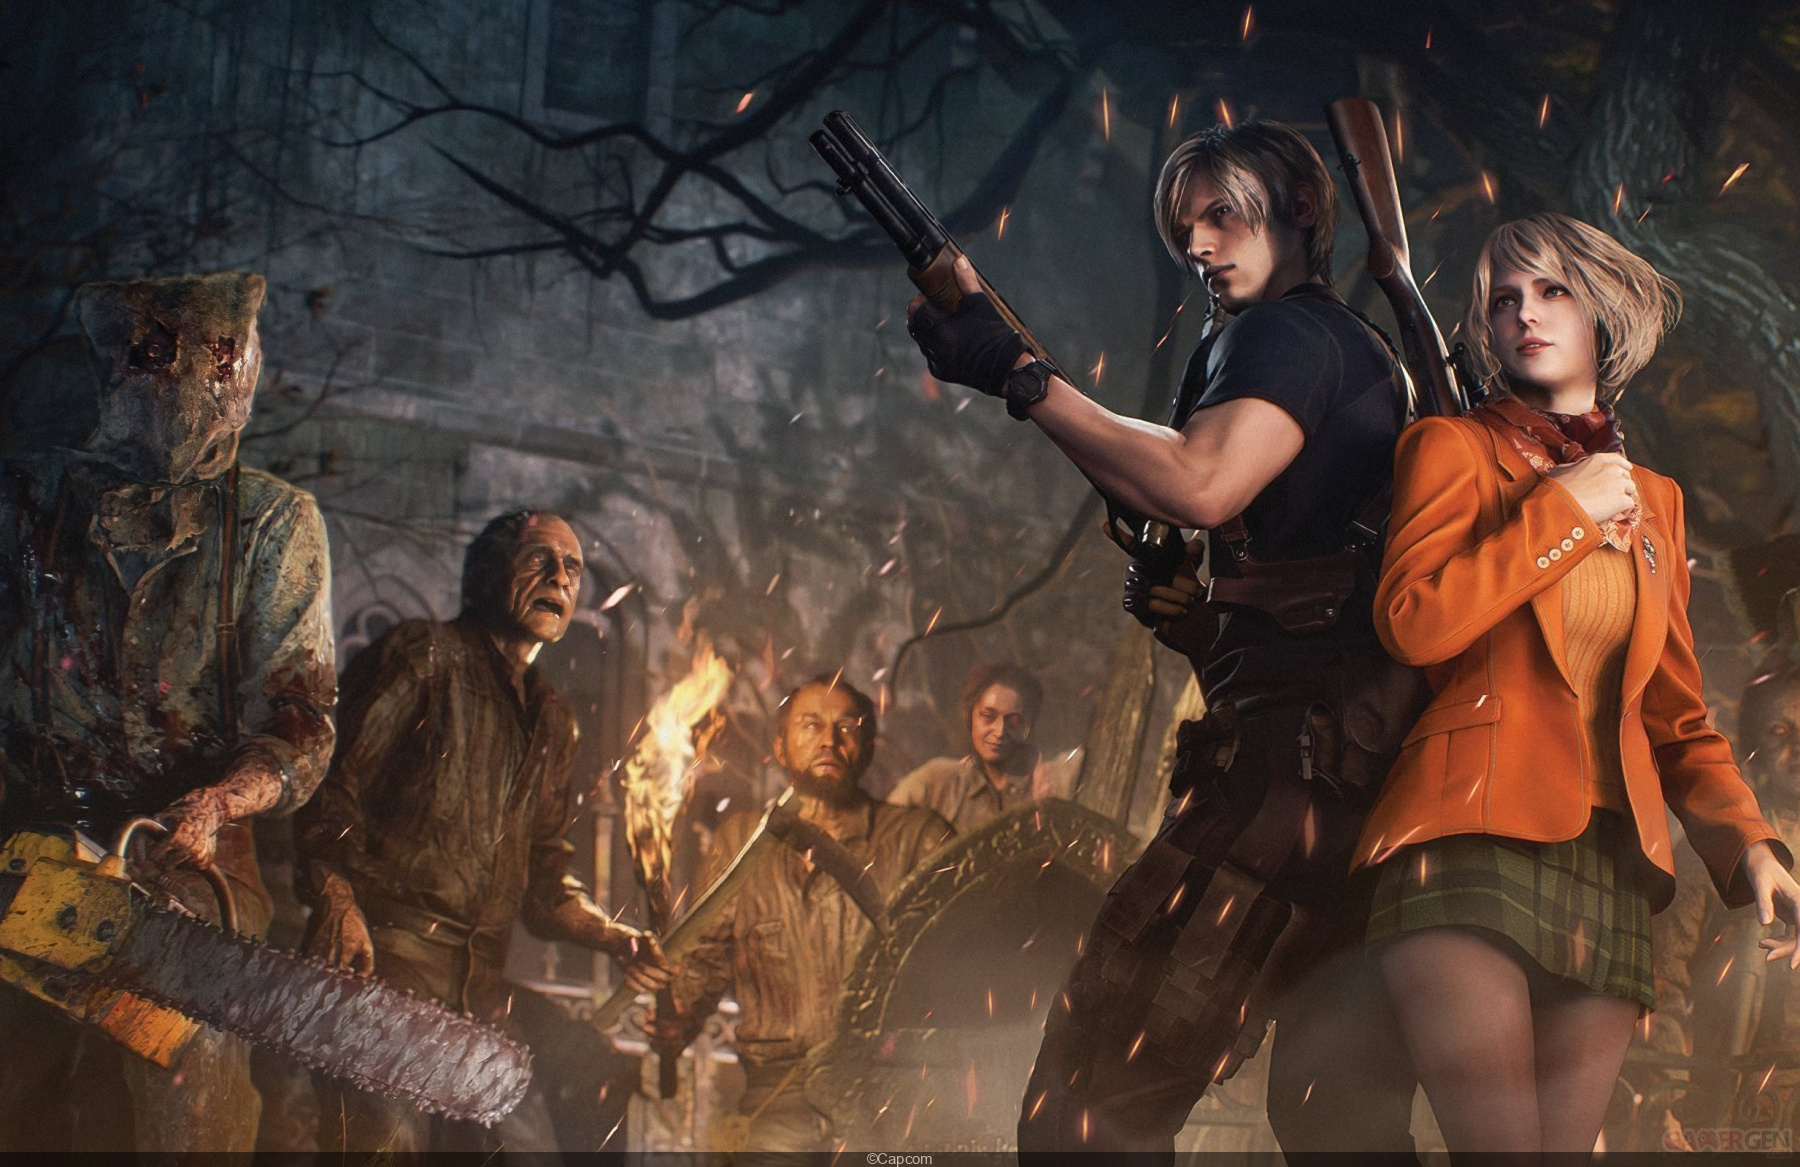 Resident Evil 4 Remake Release Date Announced at Sony's State of Play Event